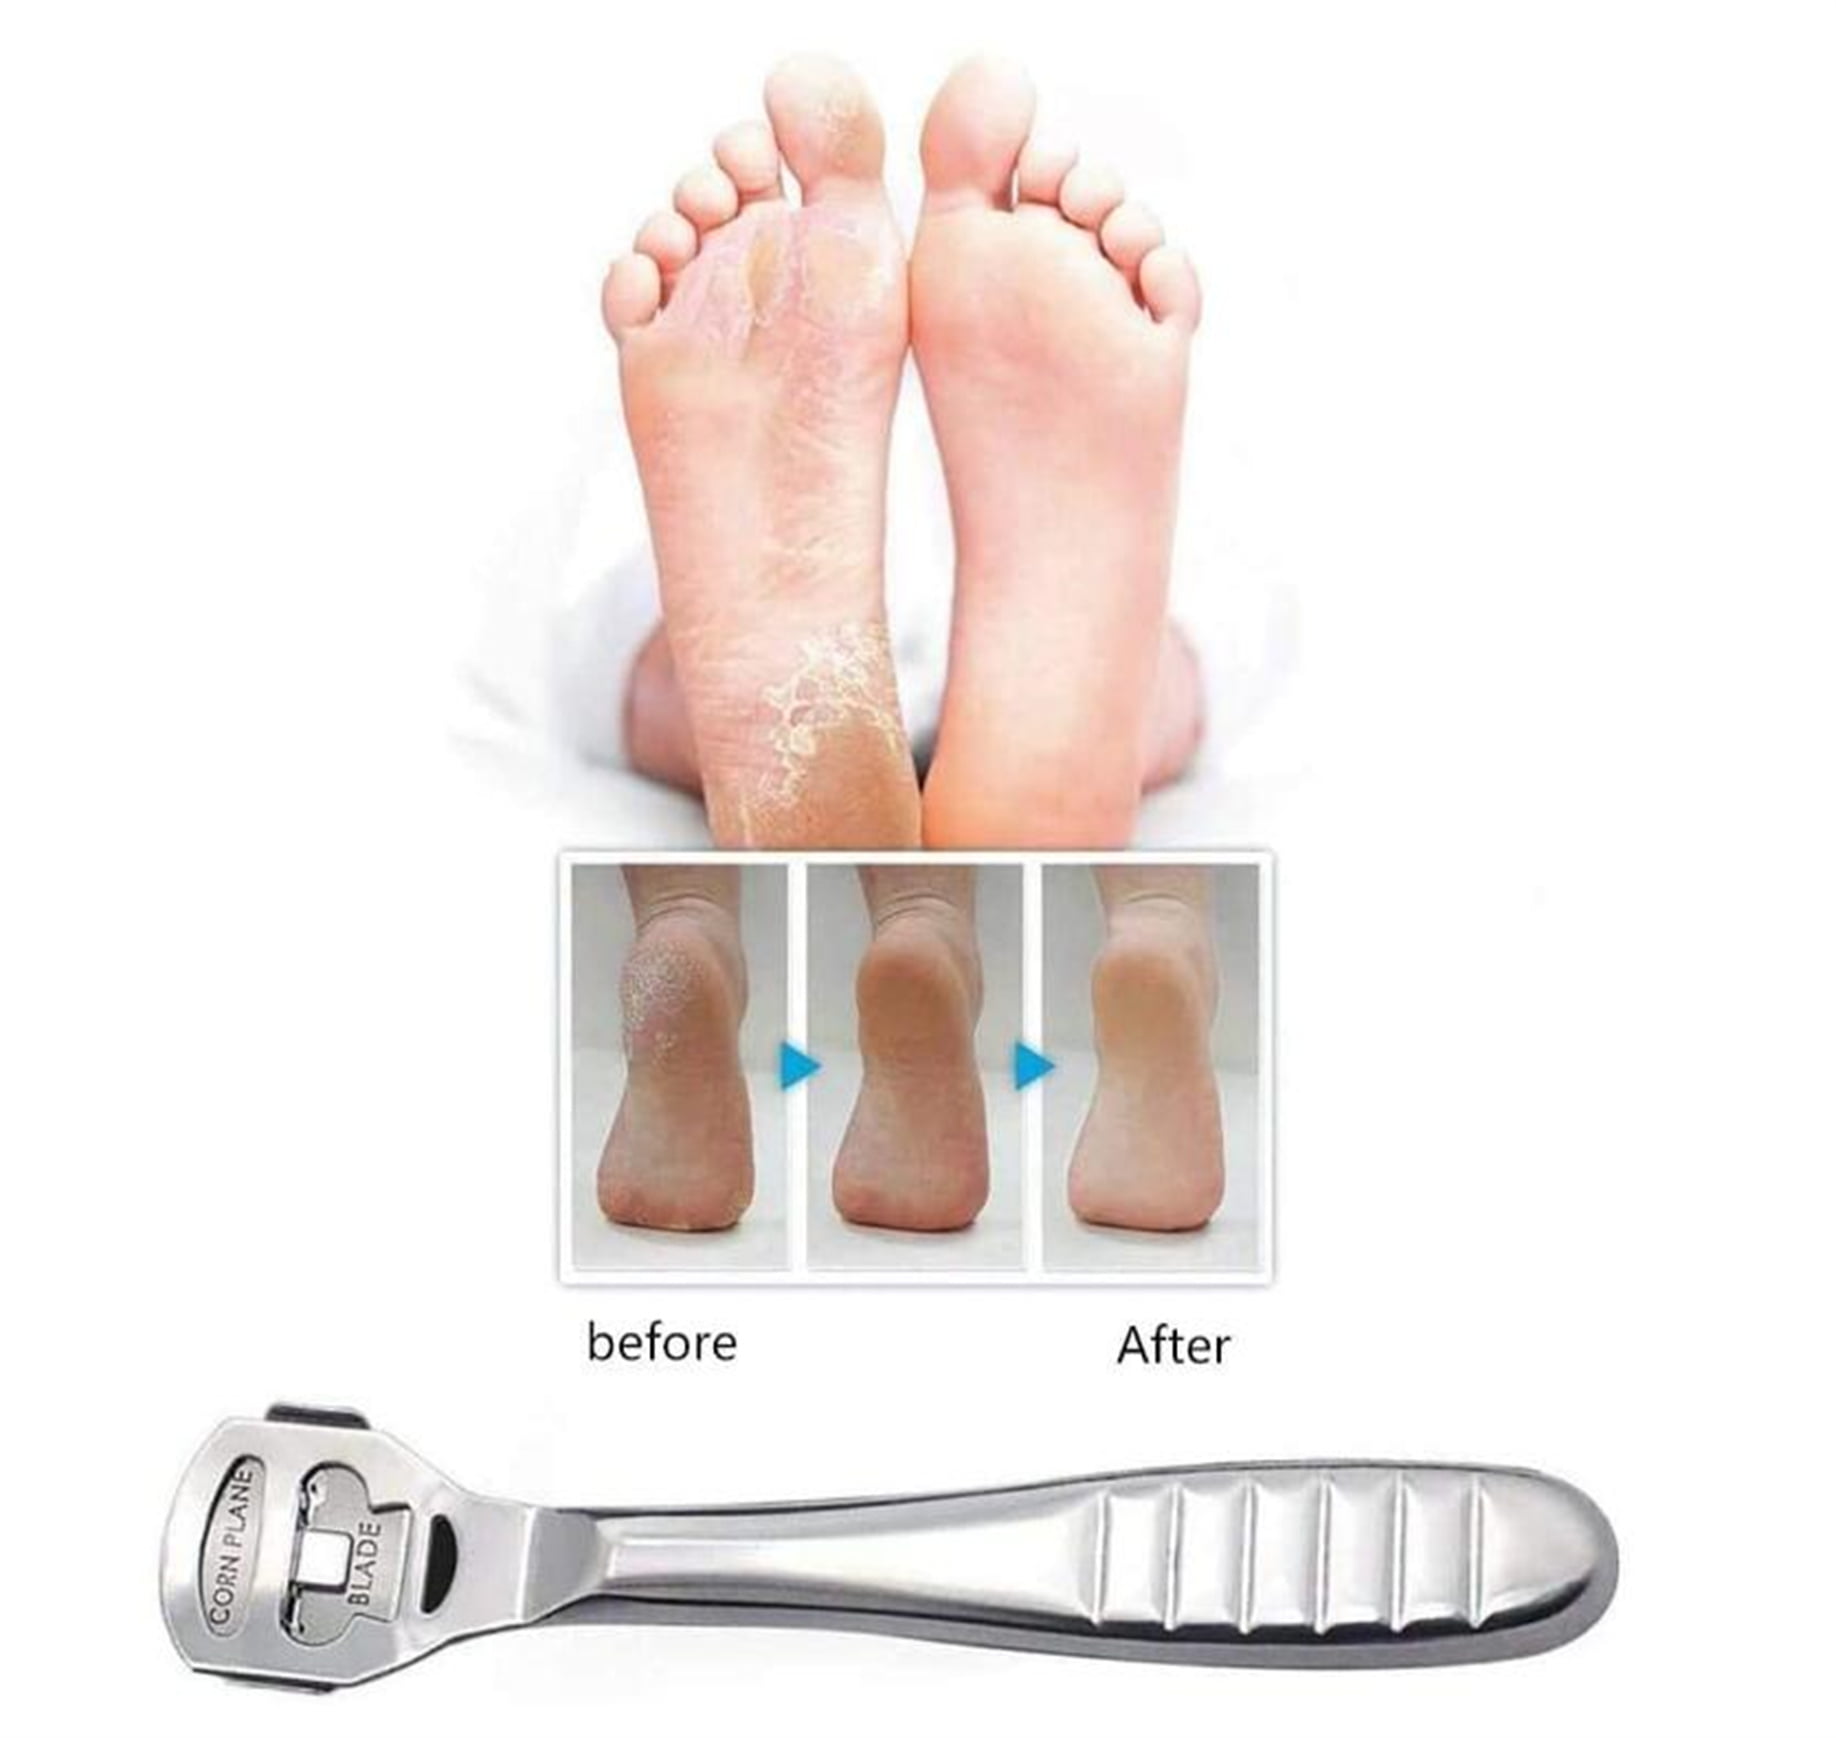 JESOT Callus Shaver, Foot Shaver Callus Remover for Feet Hand Care with  Foot File, 10pcs Blades, Foot File Head and Dead Skin Storage Cover (15Pcs  in Total) 